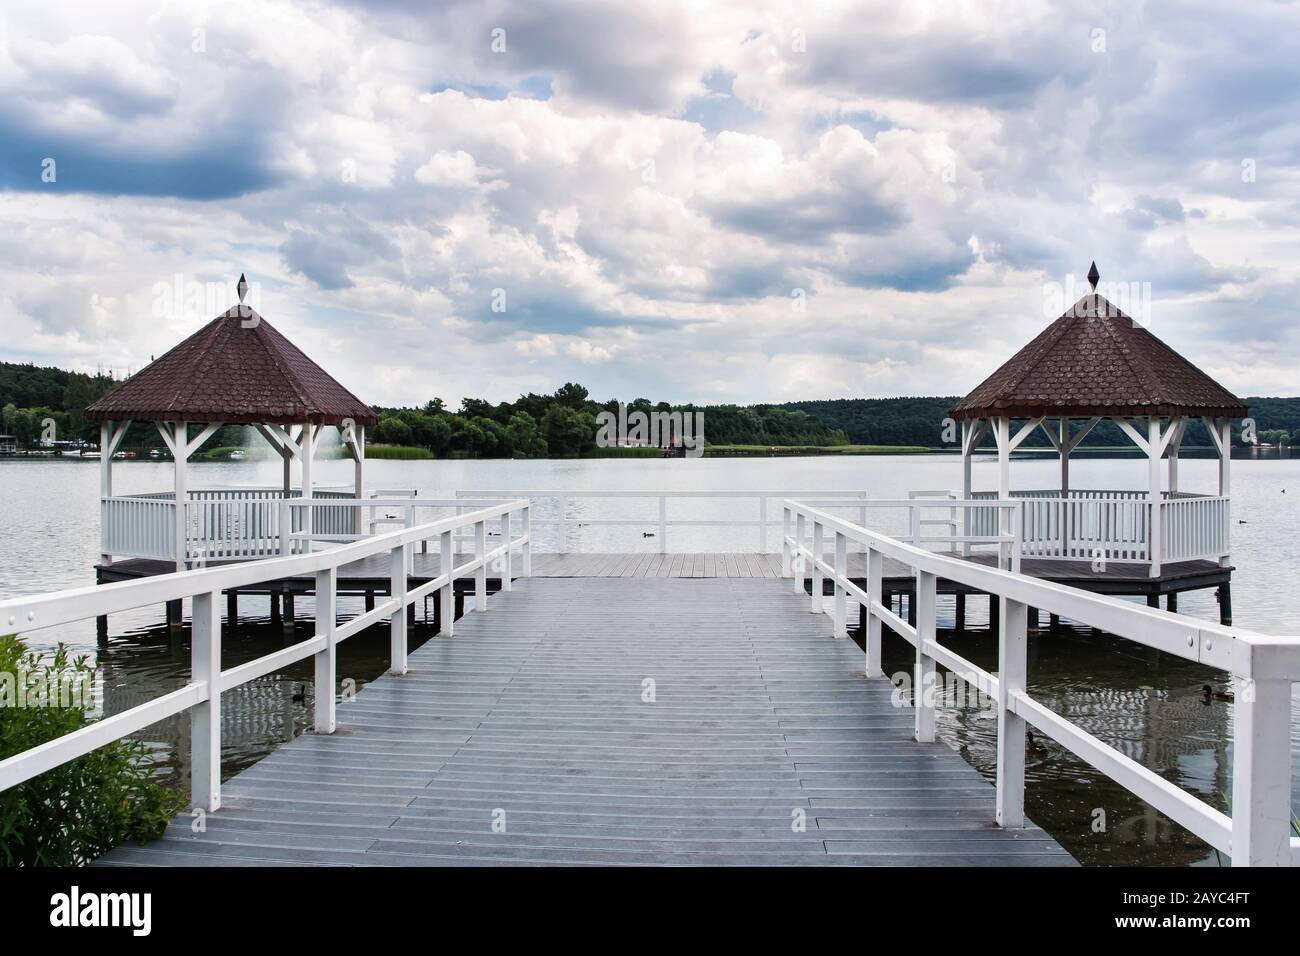 White roofed pier with wooden huts on lake, green forest and clouds in background, Poland Stock Photo